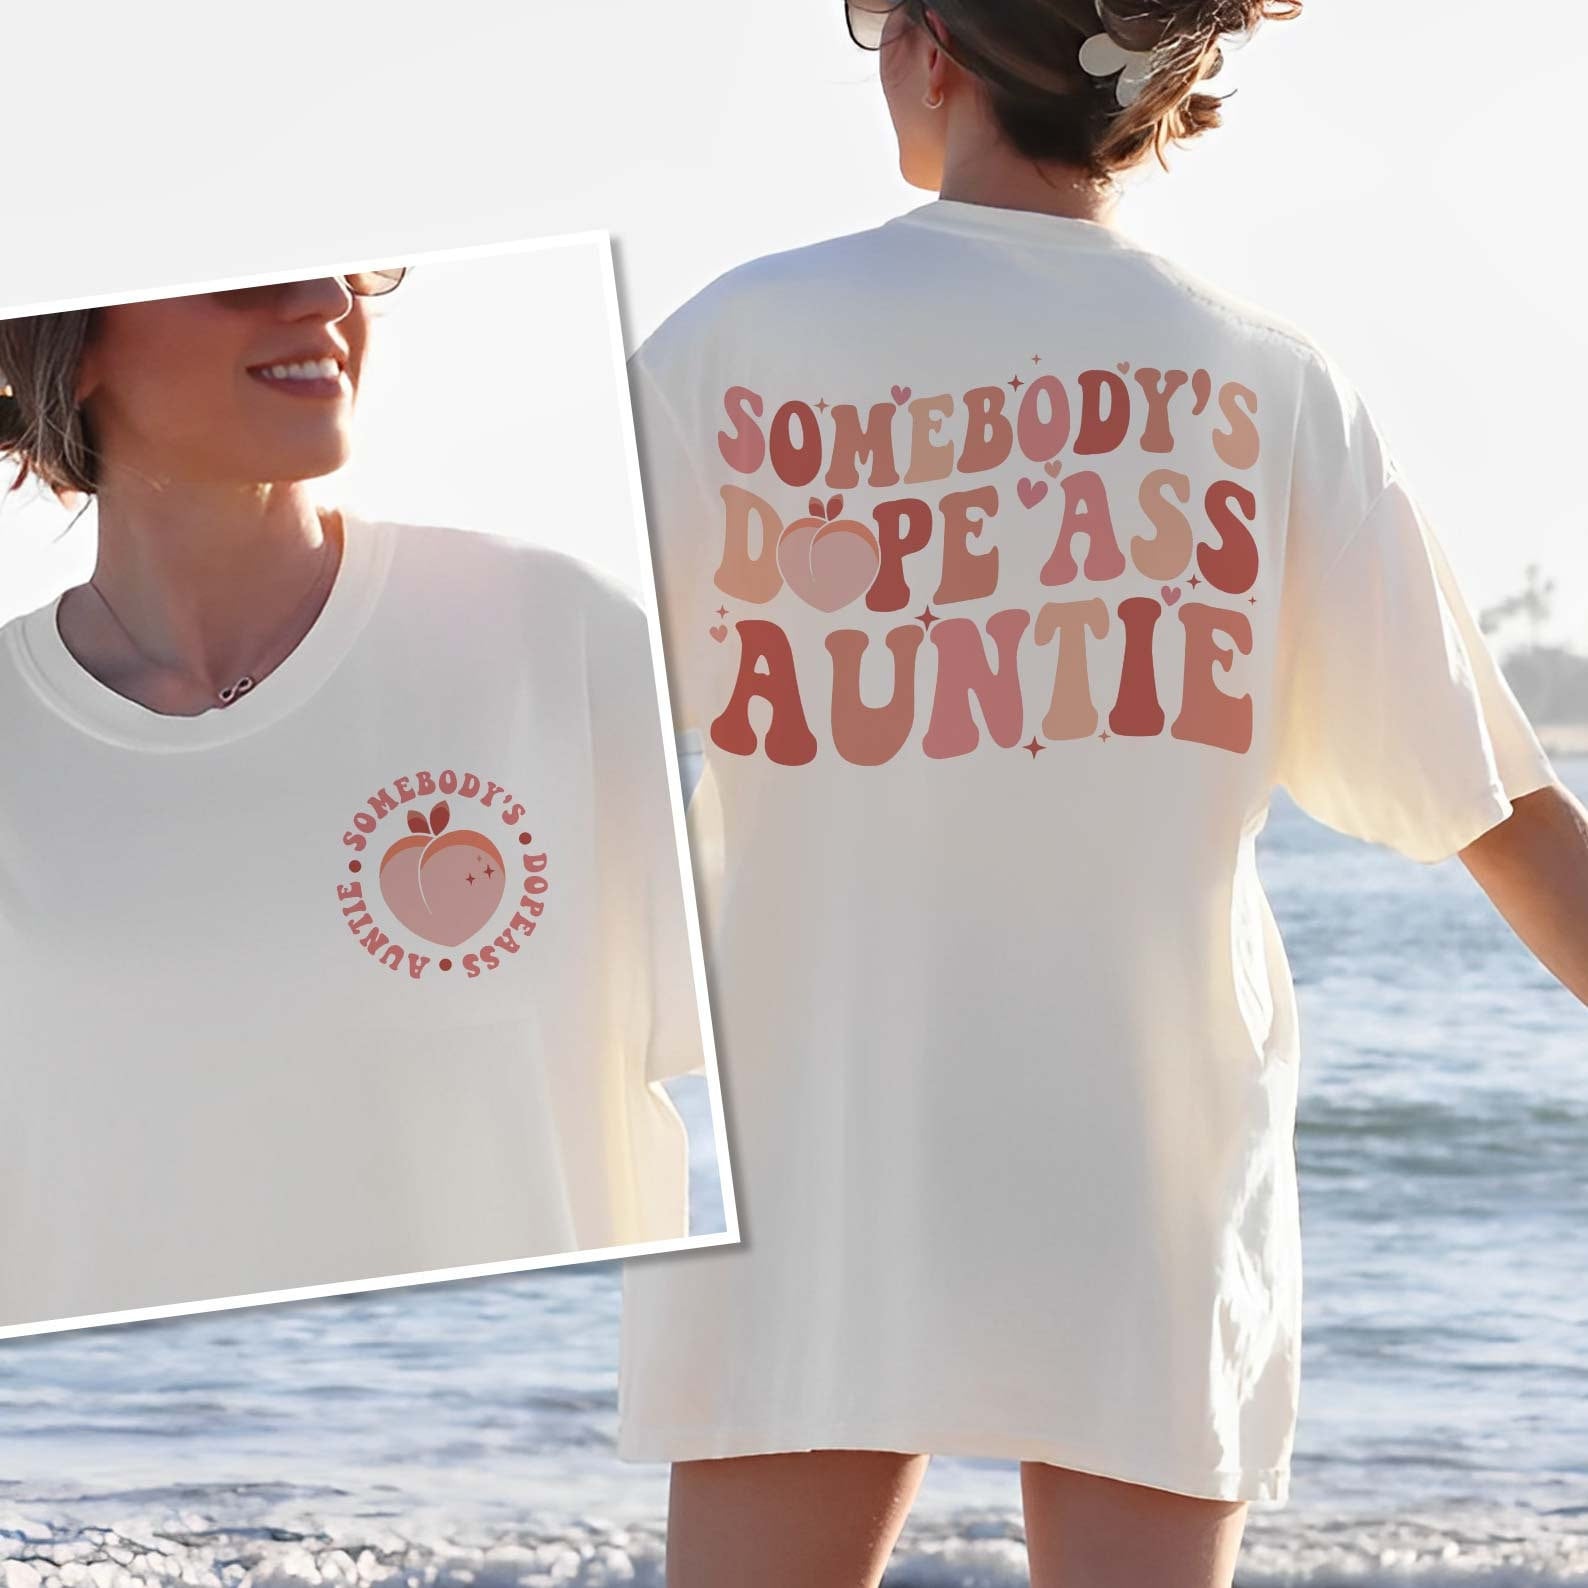 Somebody’s Dope Ass Auntie Sweatshirt, Funny Auntie Tee, Gift for Aunt, Pregnancy Announcement, Aunt Life